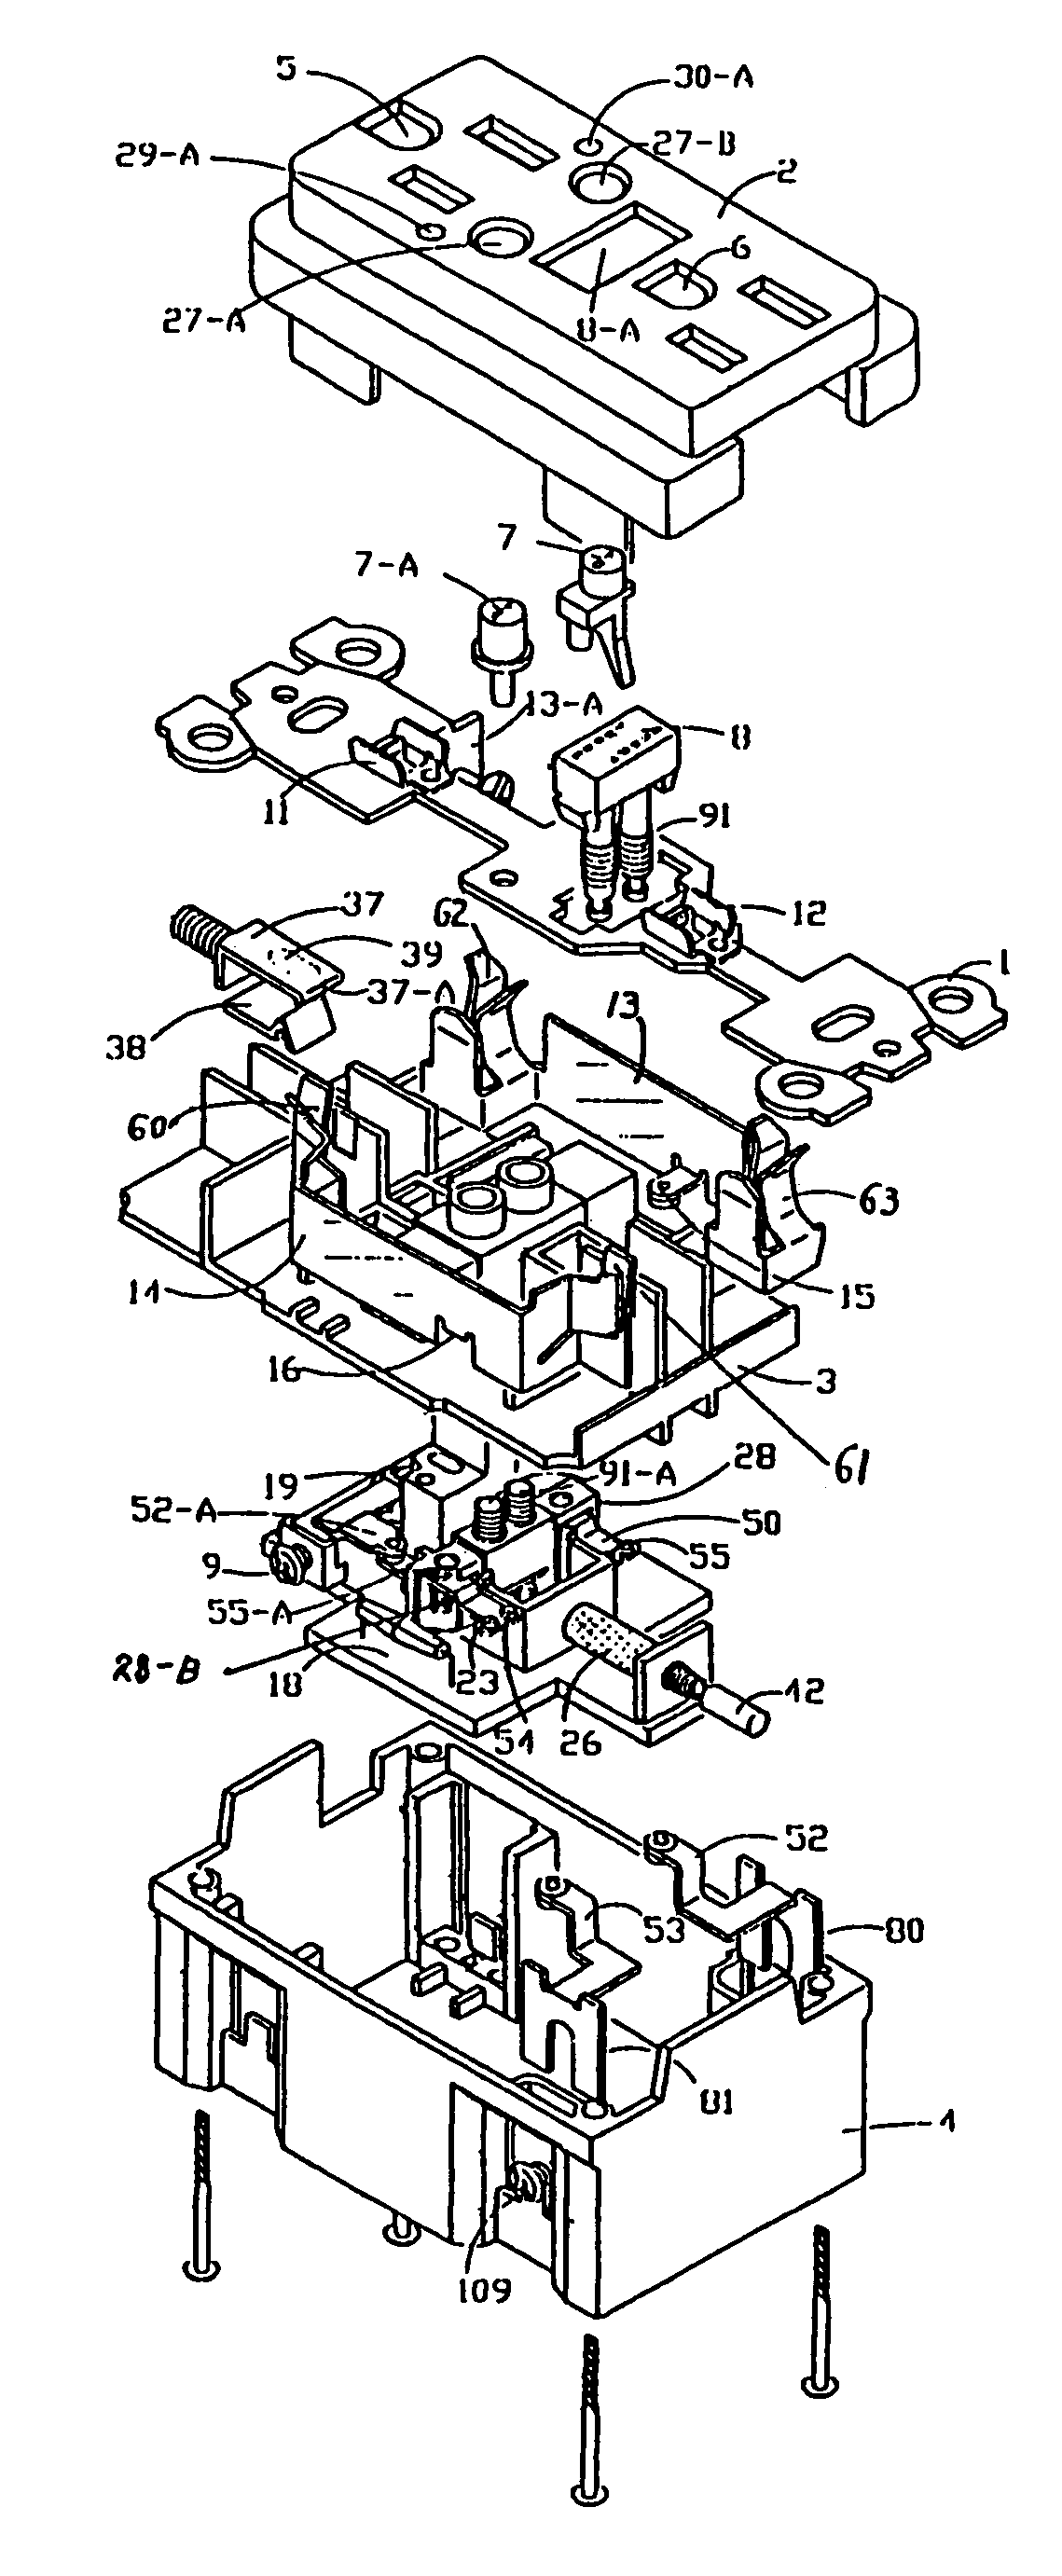 Receptacle device having protection against arc faults and leakage currents